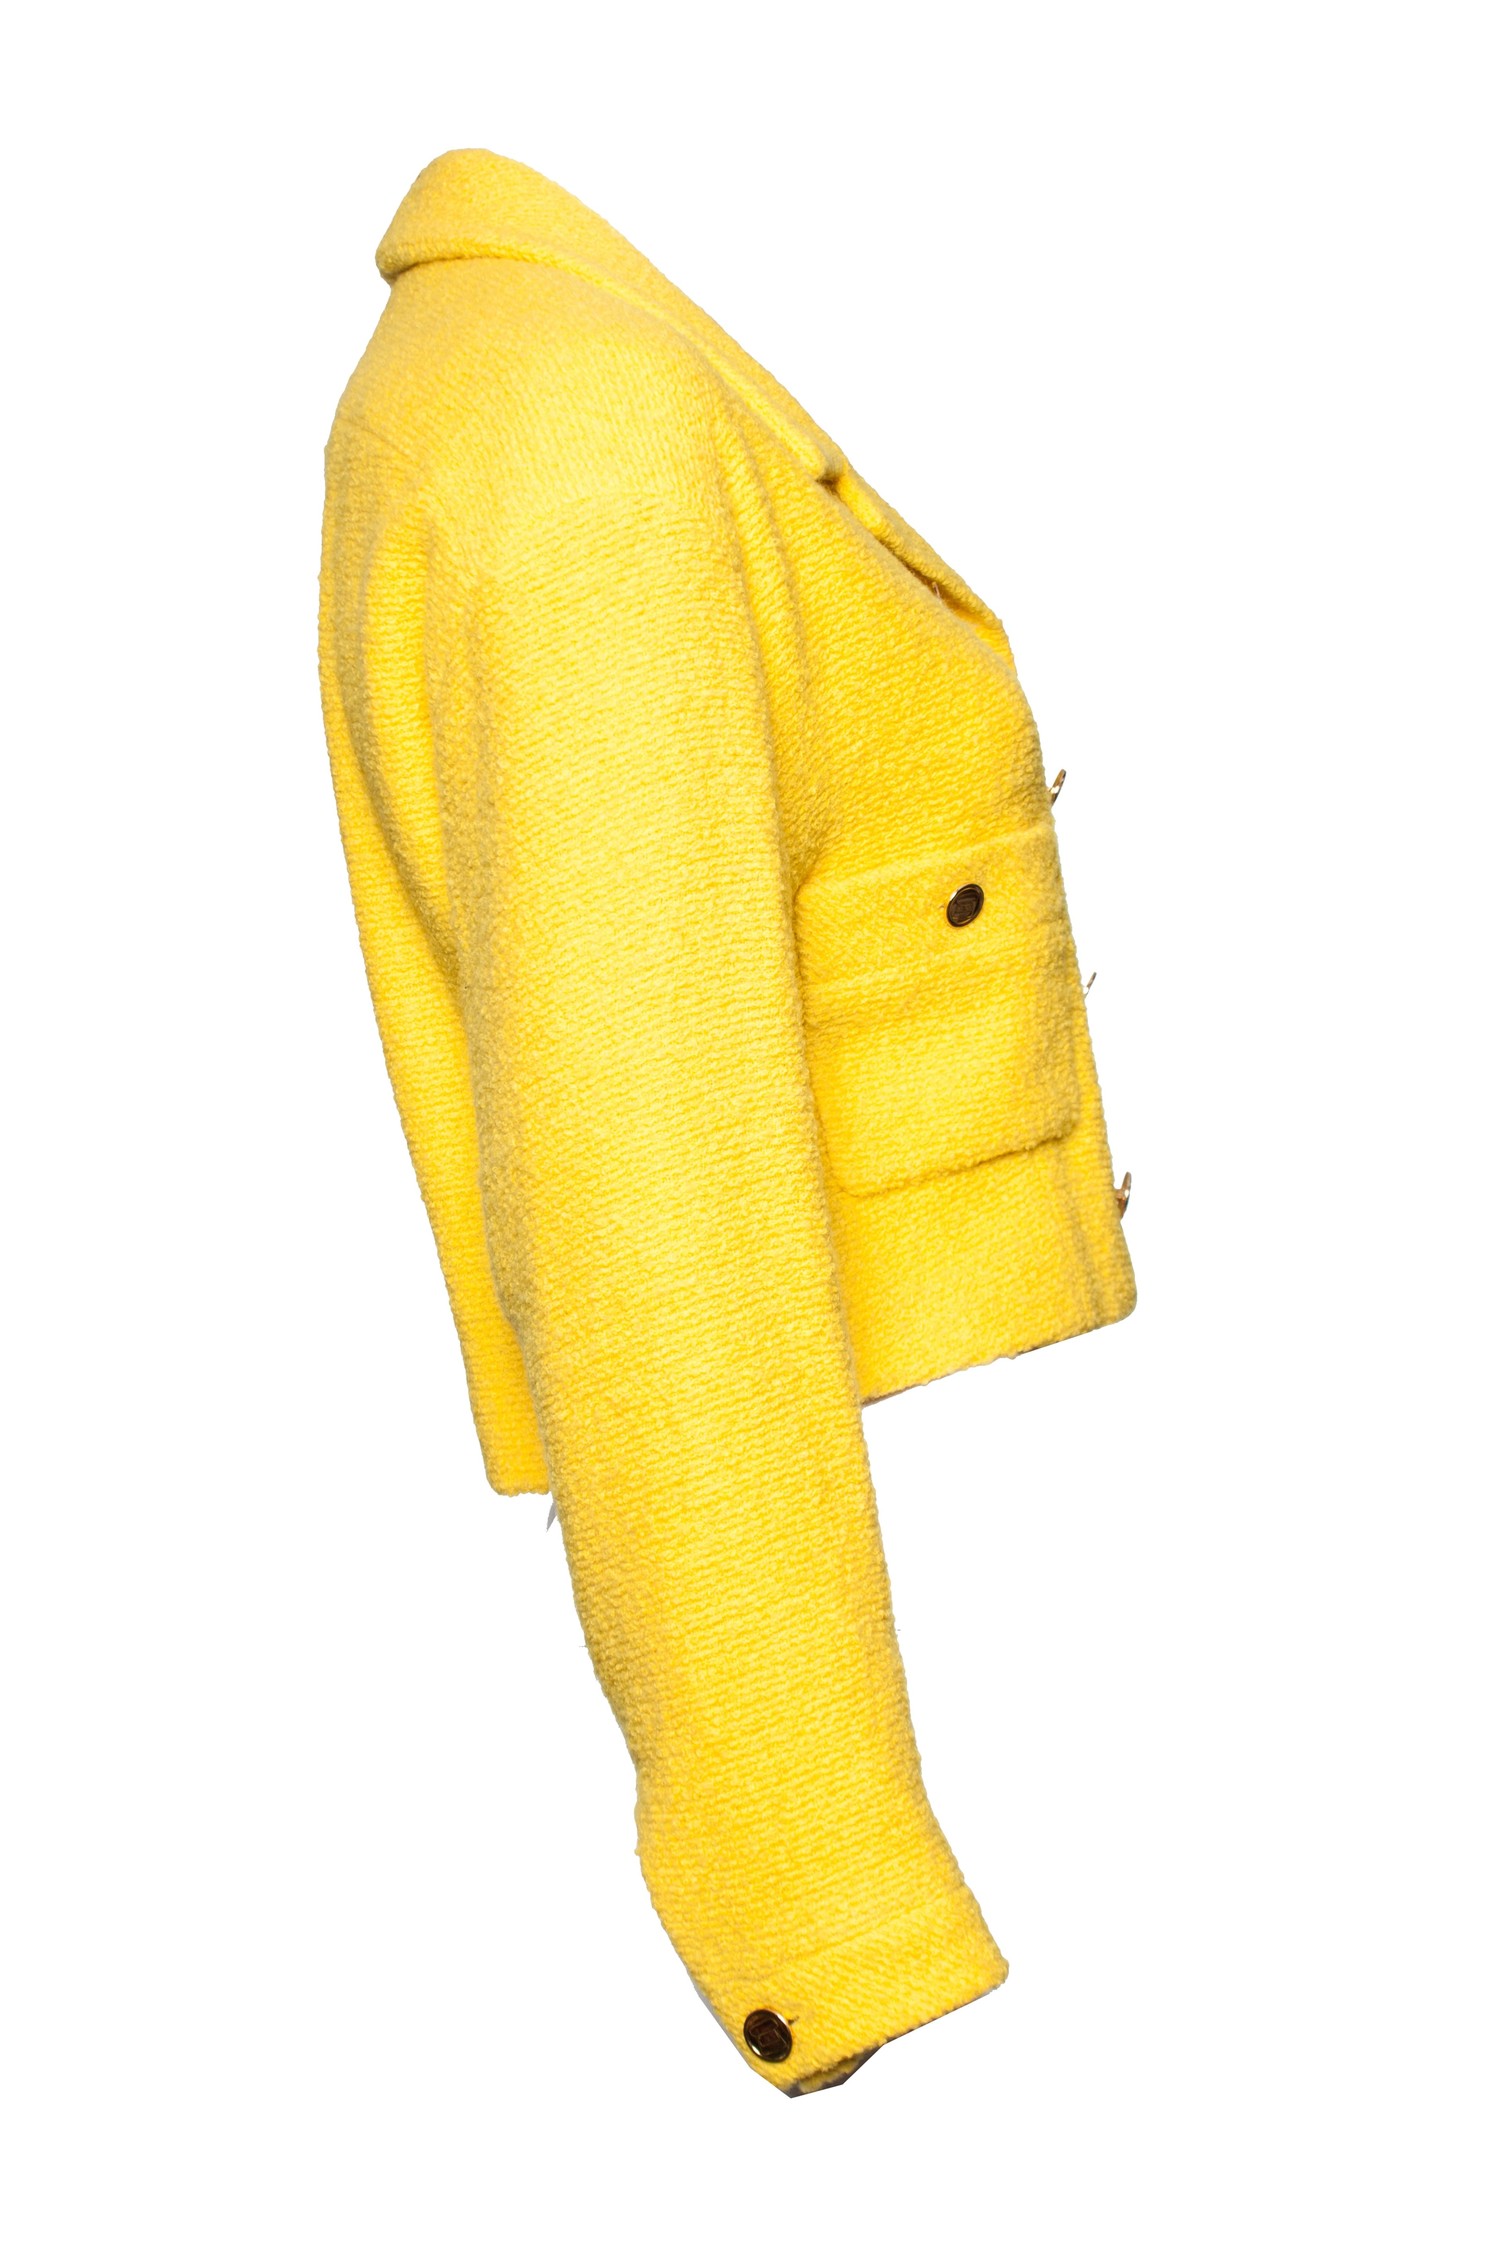 Pre-owned Chanel Tweed Jacket In Yellow